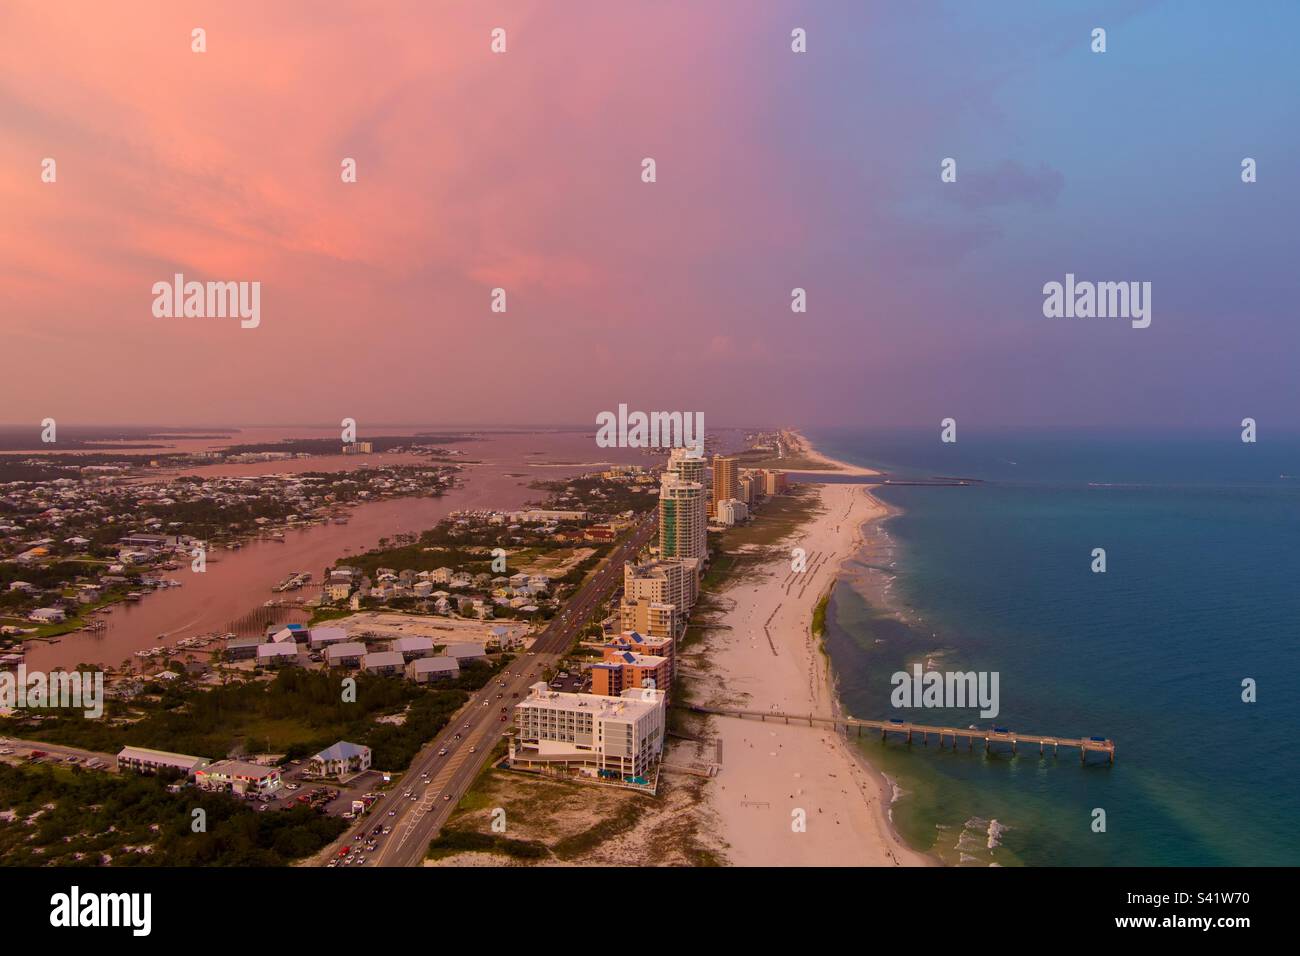 Aerial view of the beach at sunset Stock Photo